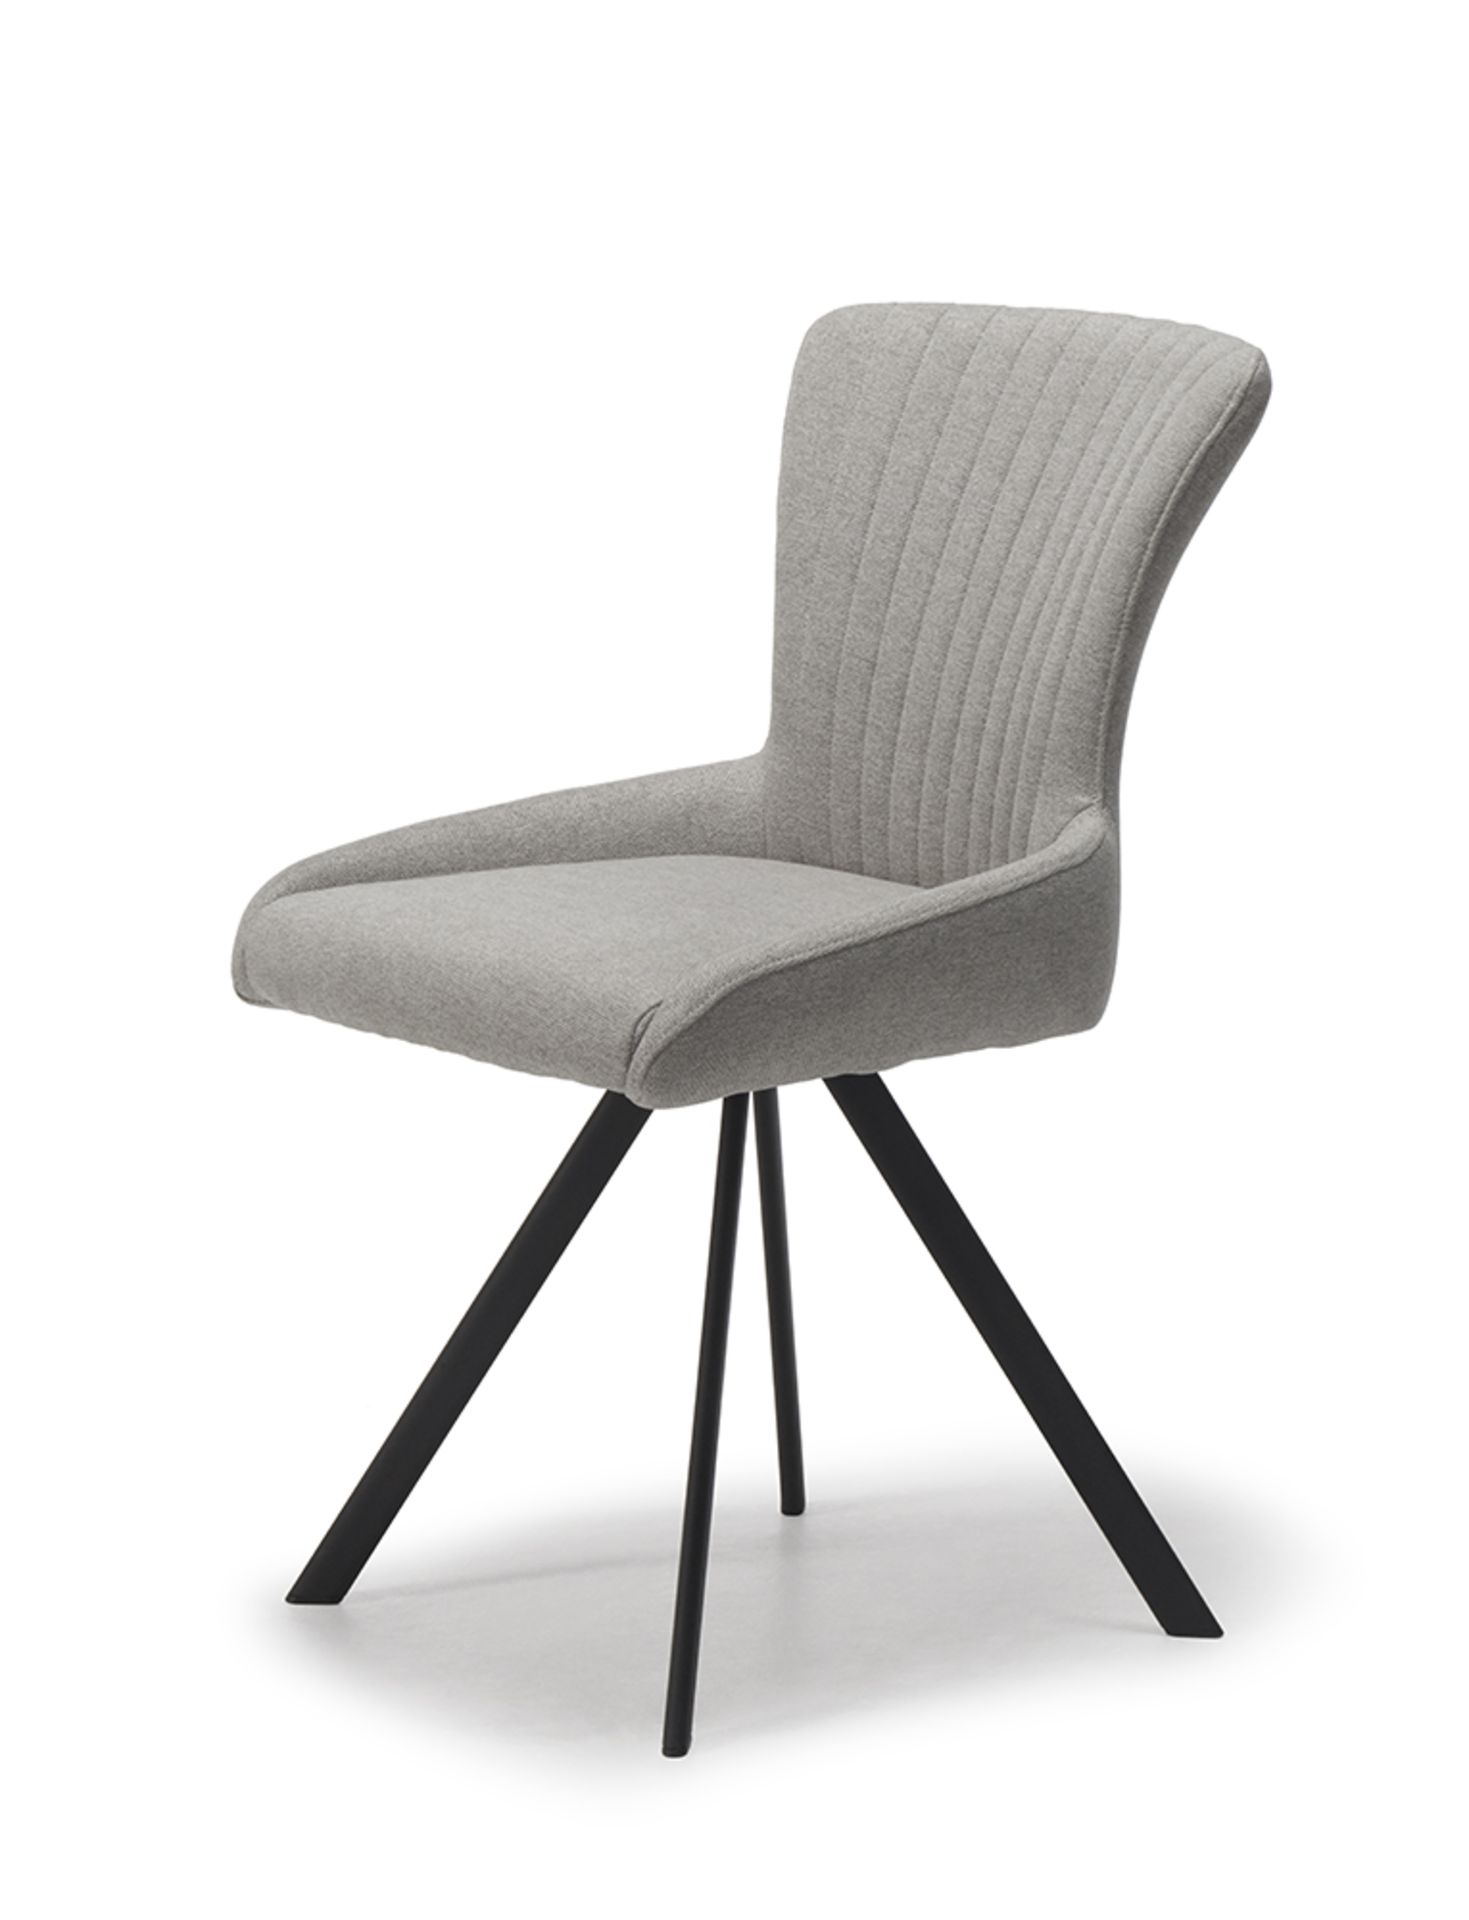 A Set of 6 x Maria Chairs by Kesterport Maria has the same self-return mechanism as many of the - Bild 9 aus 9